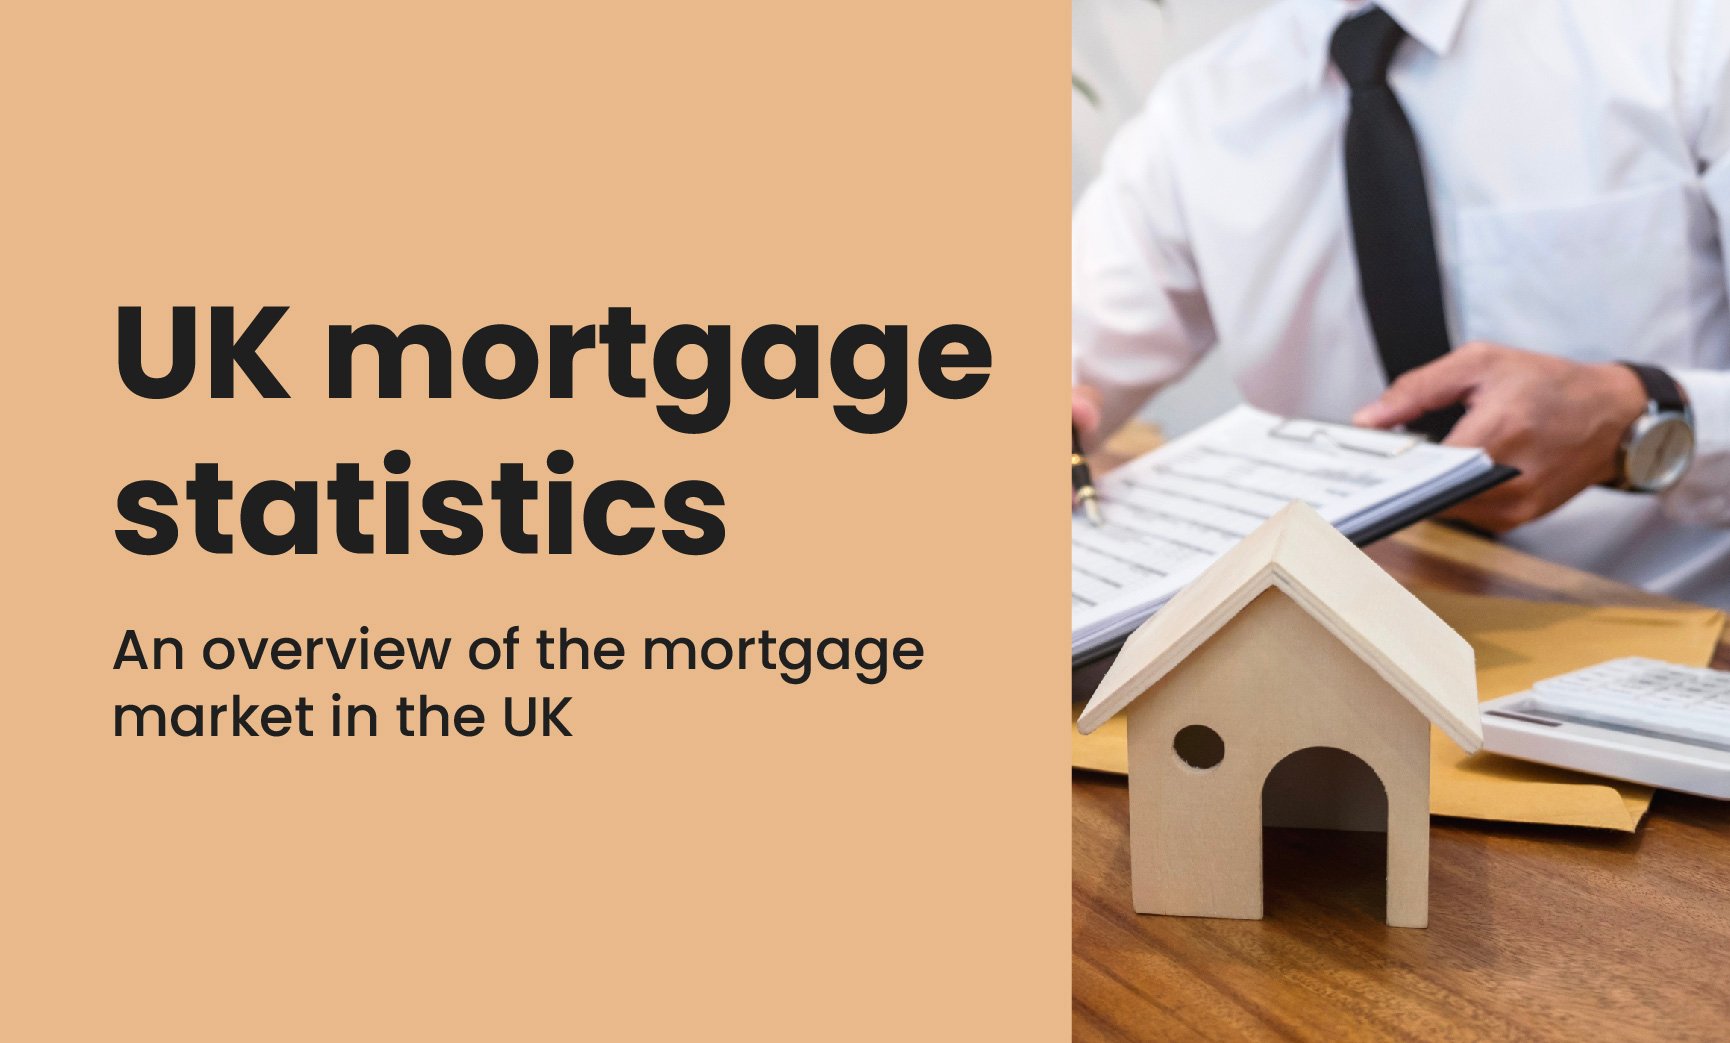 A header that says “UK mortgage statistics” in bold black text on an orange background with an image of a toy house next to a contract being signed